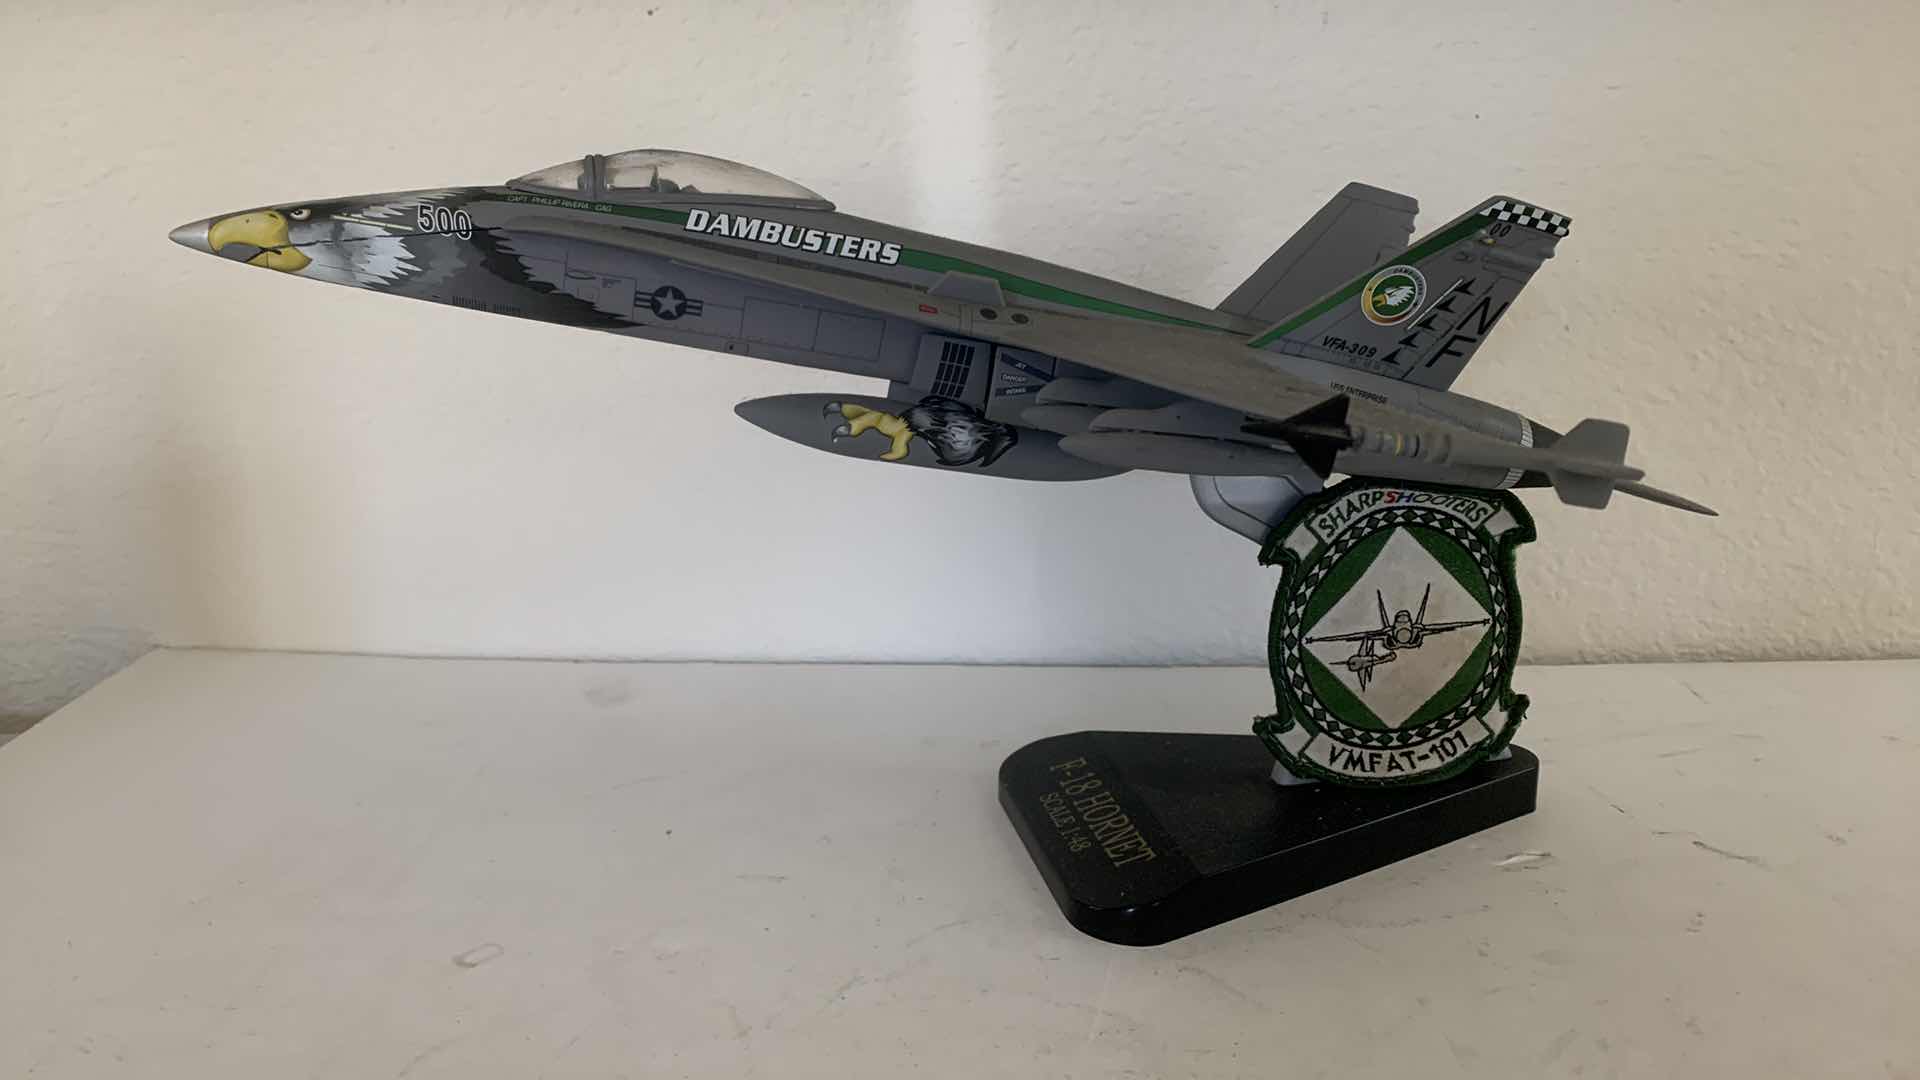 Photo 3 of F-18 HORNET SCALE 1:48 MINIATURE DISPLAY AIRPLANE.